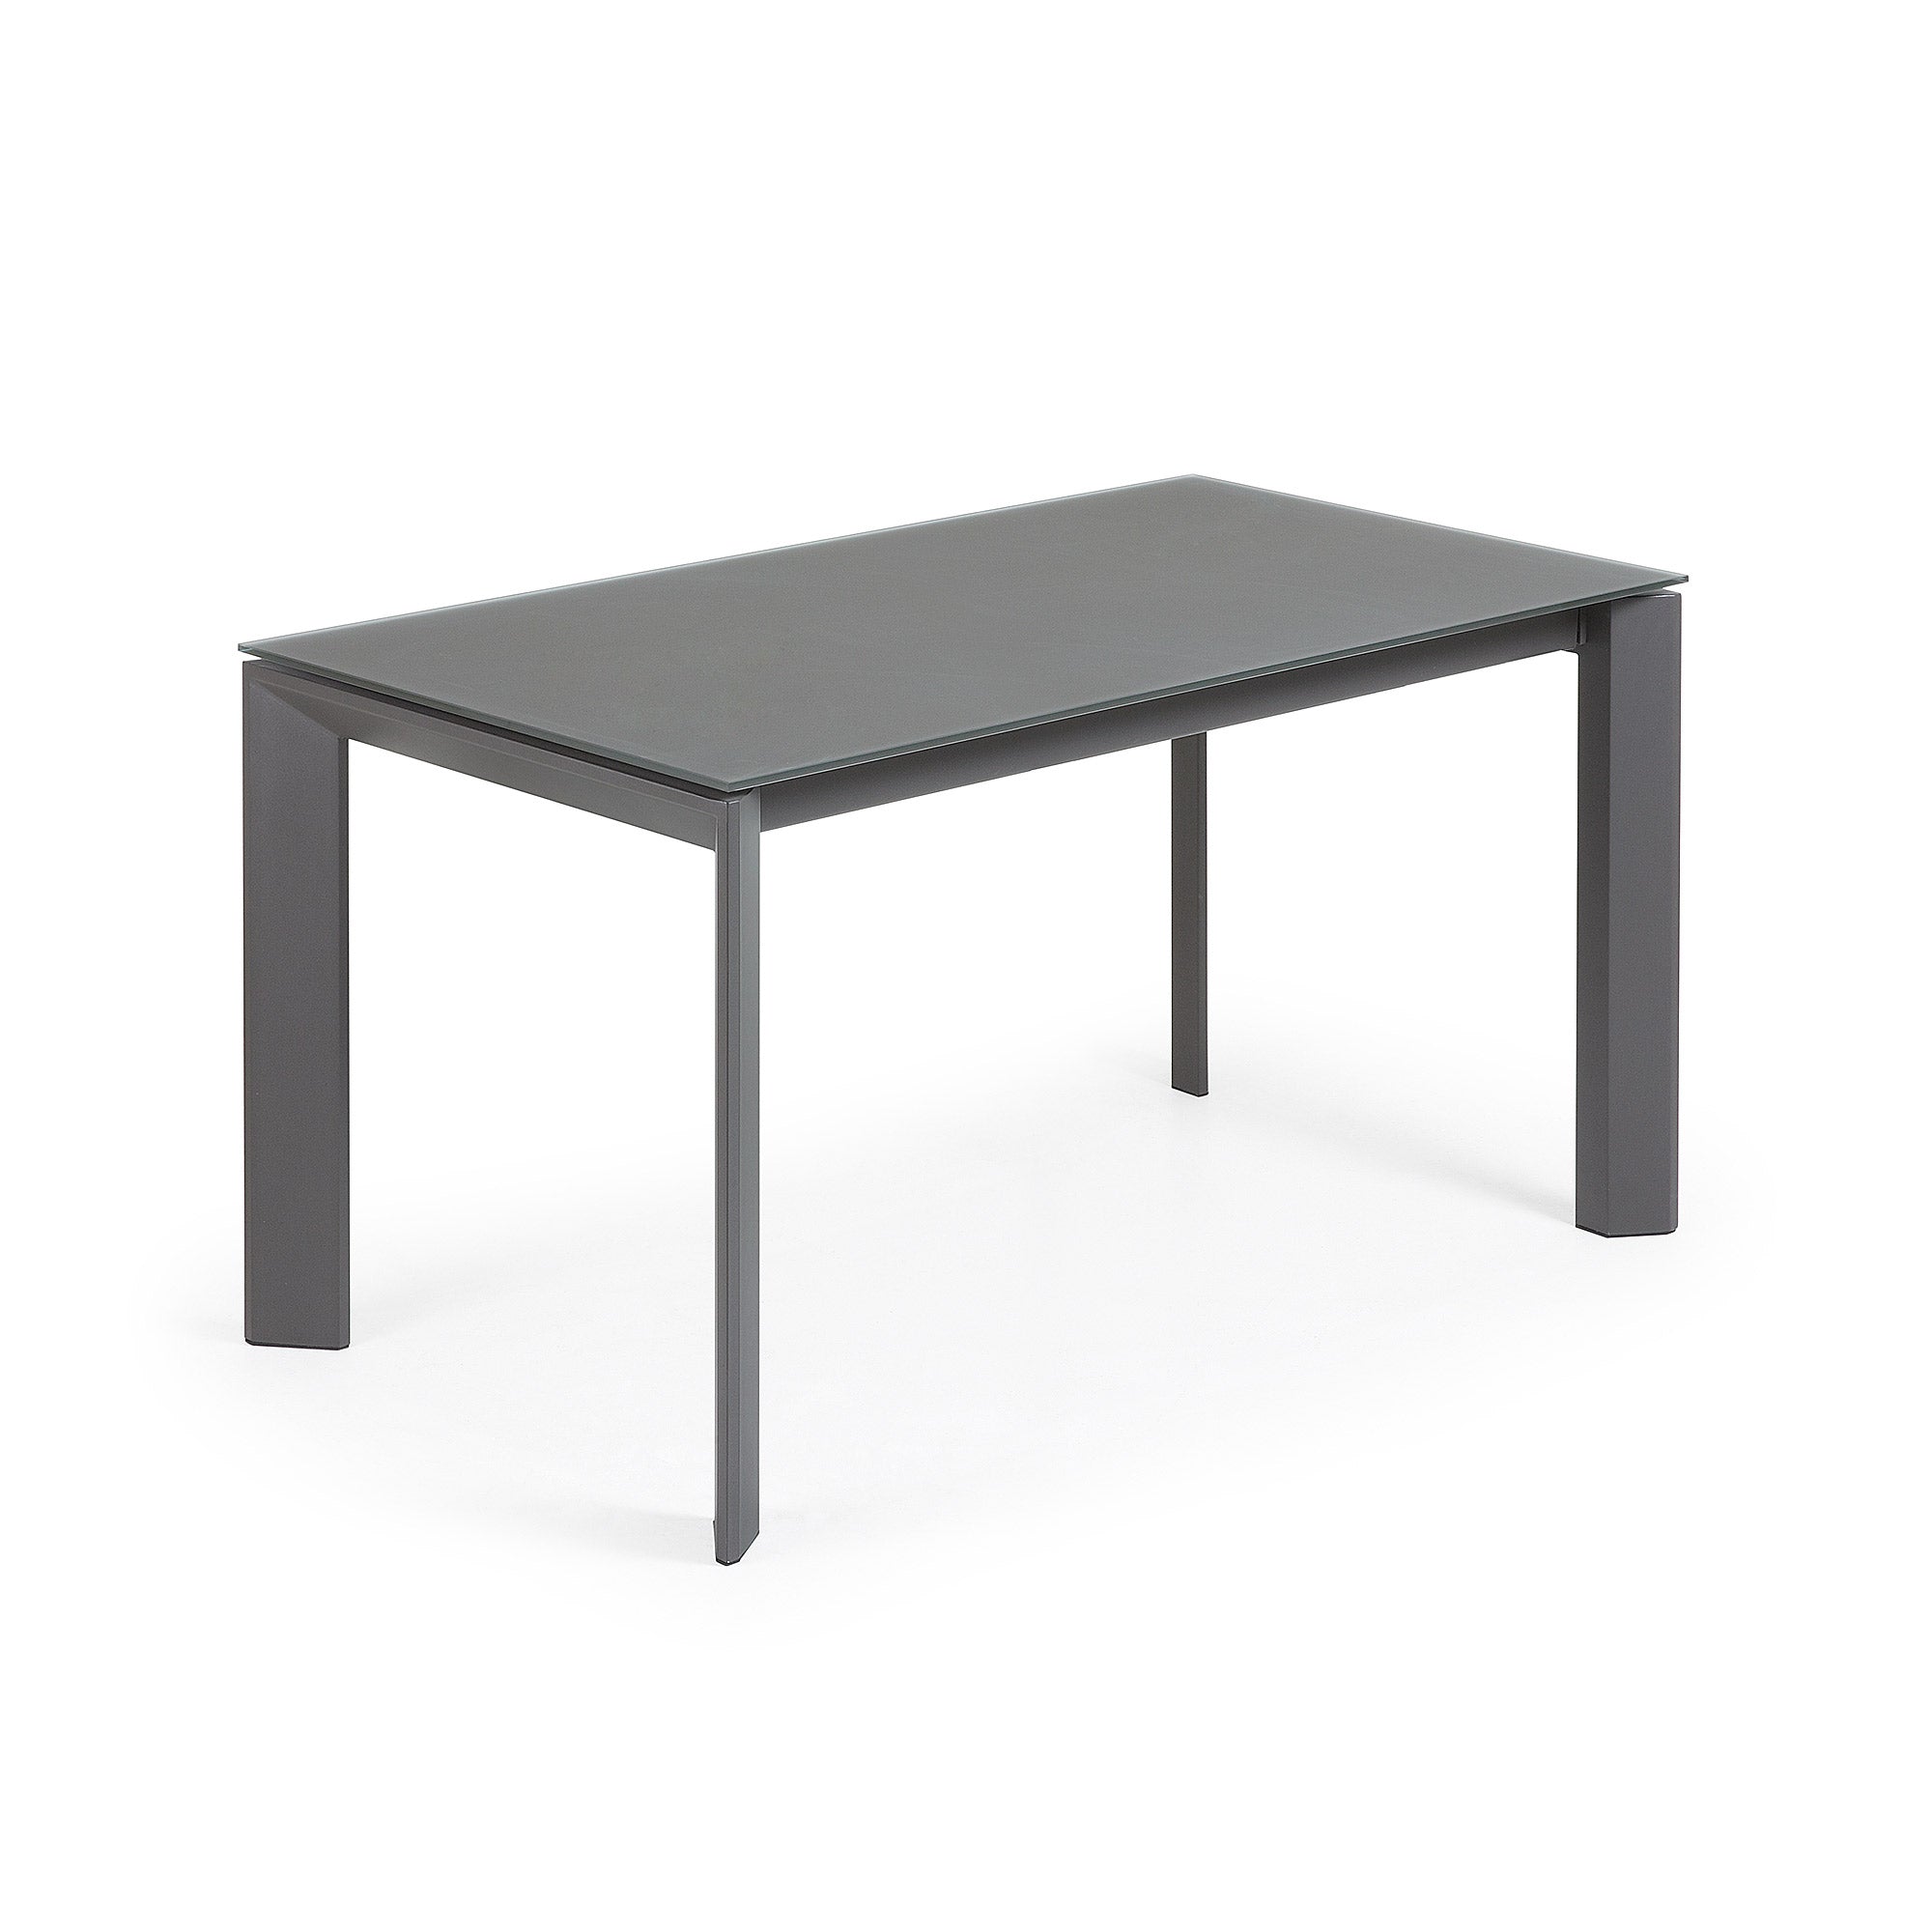 Axis extendable table in grey glass with steel legs in a dark grey finish, 140 (200) cm